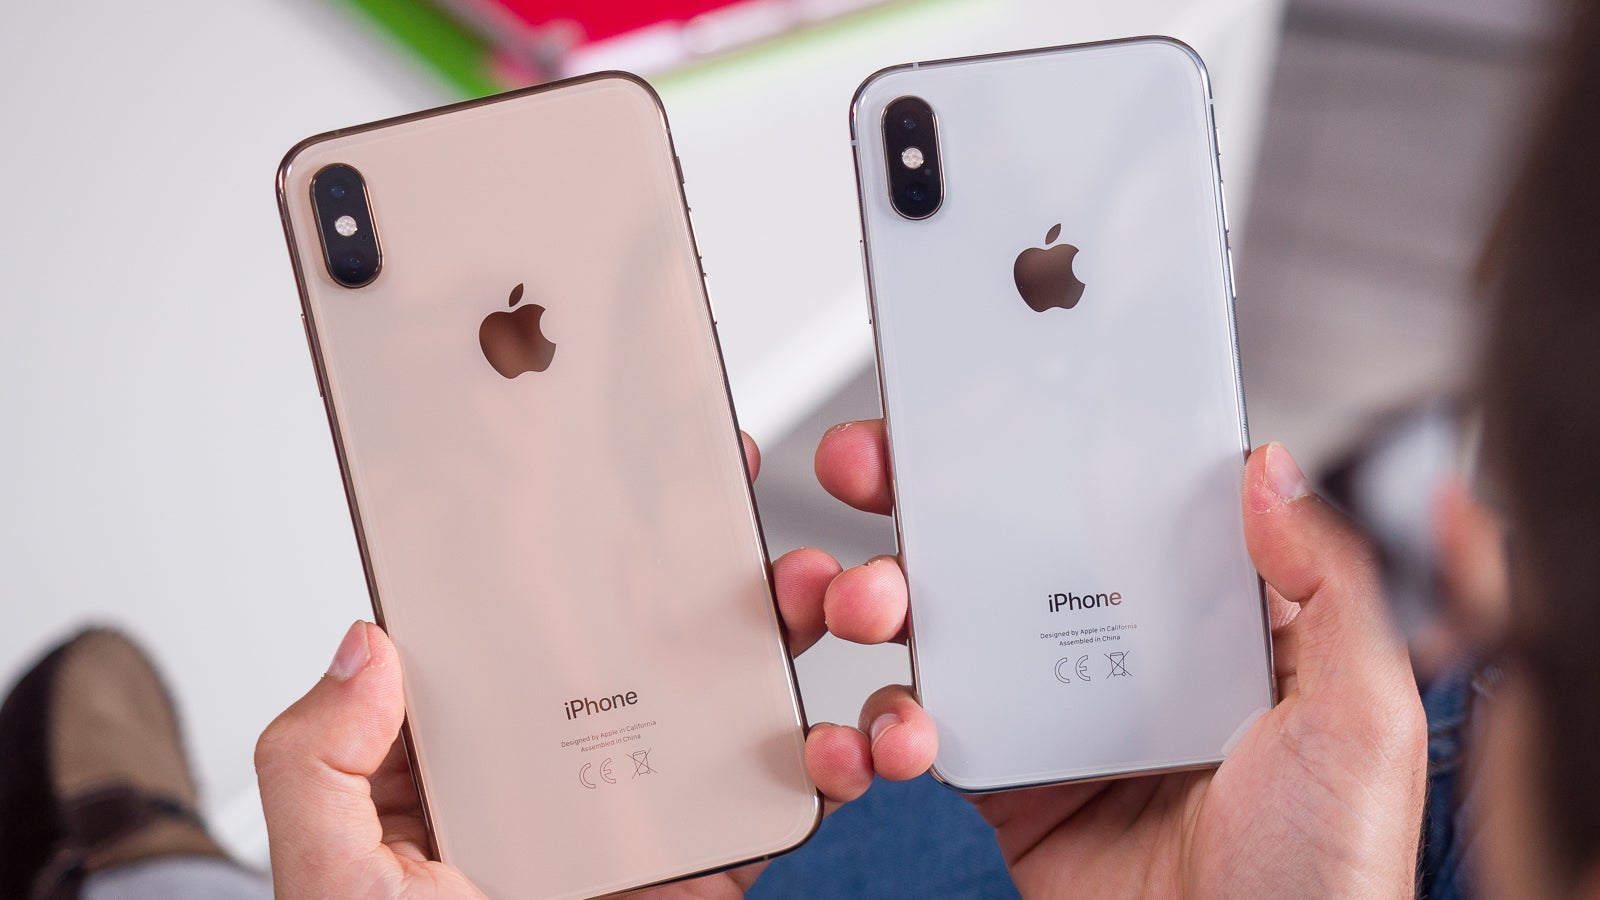 Apple could move iPhone production out of China if a 25% tariff is